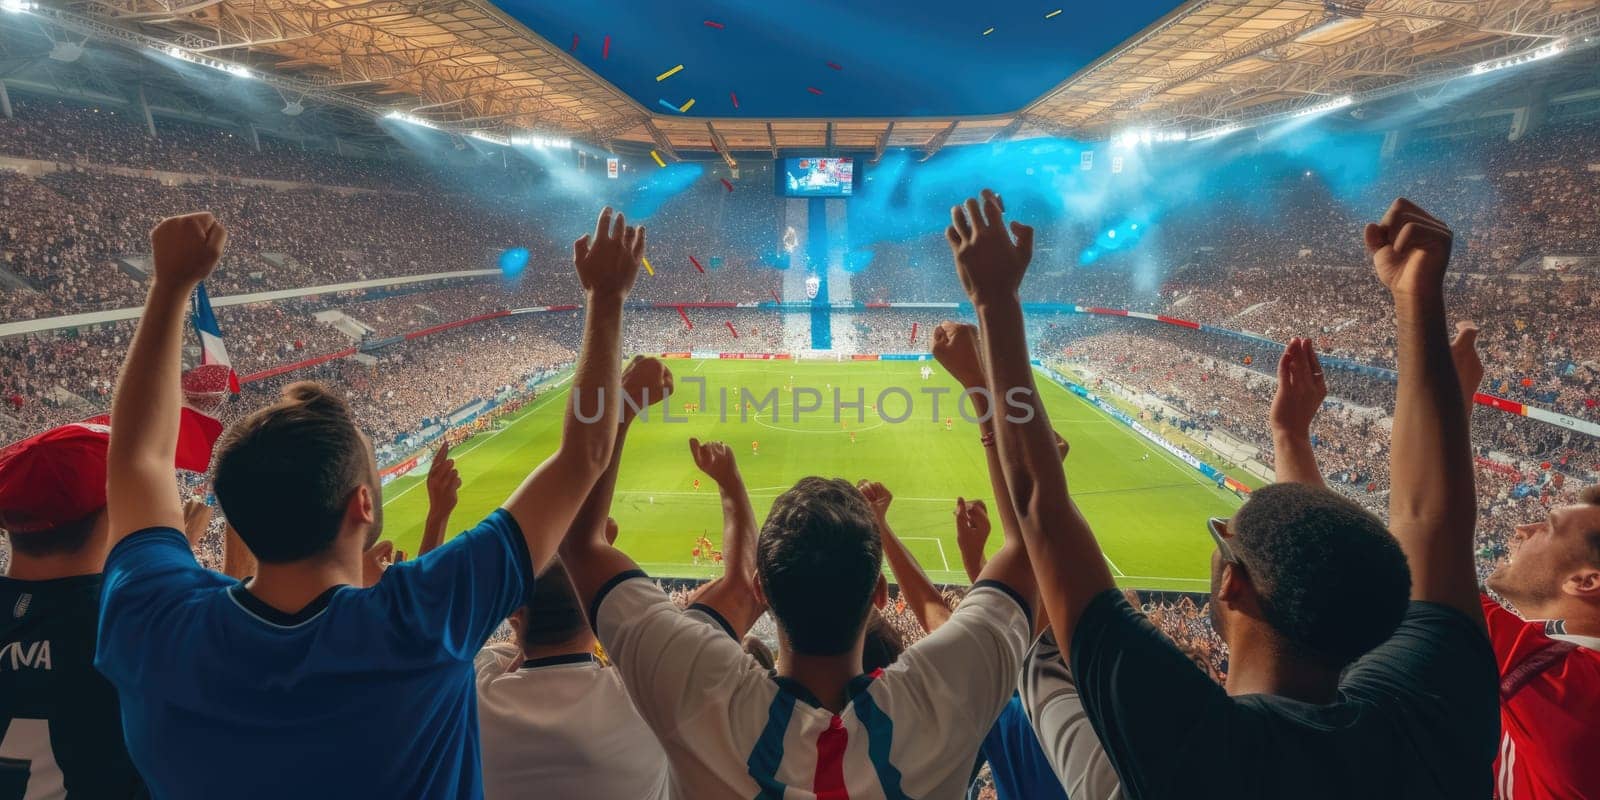 Fans excitedly gesture at thrilling football match in stadium AIG41 by biancoblue